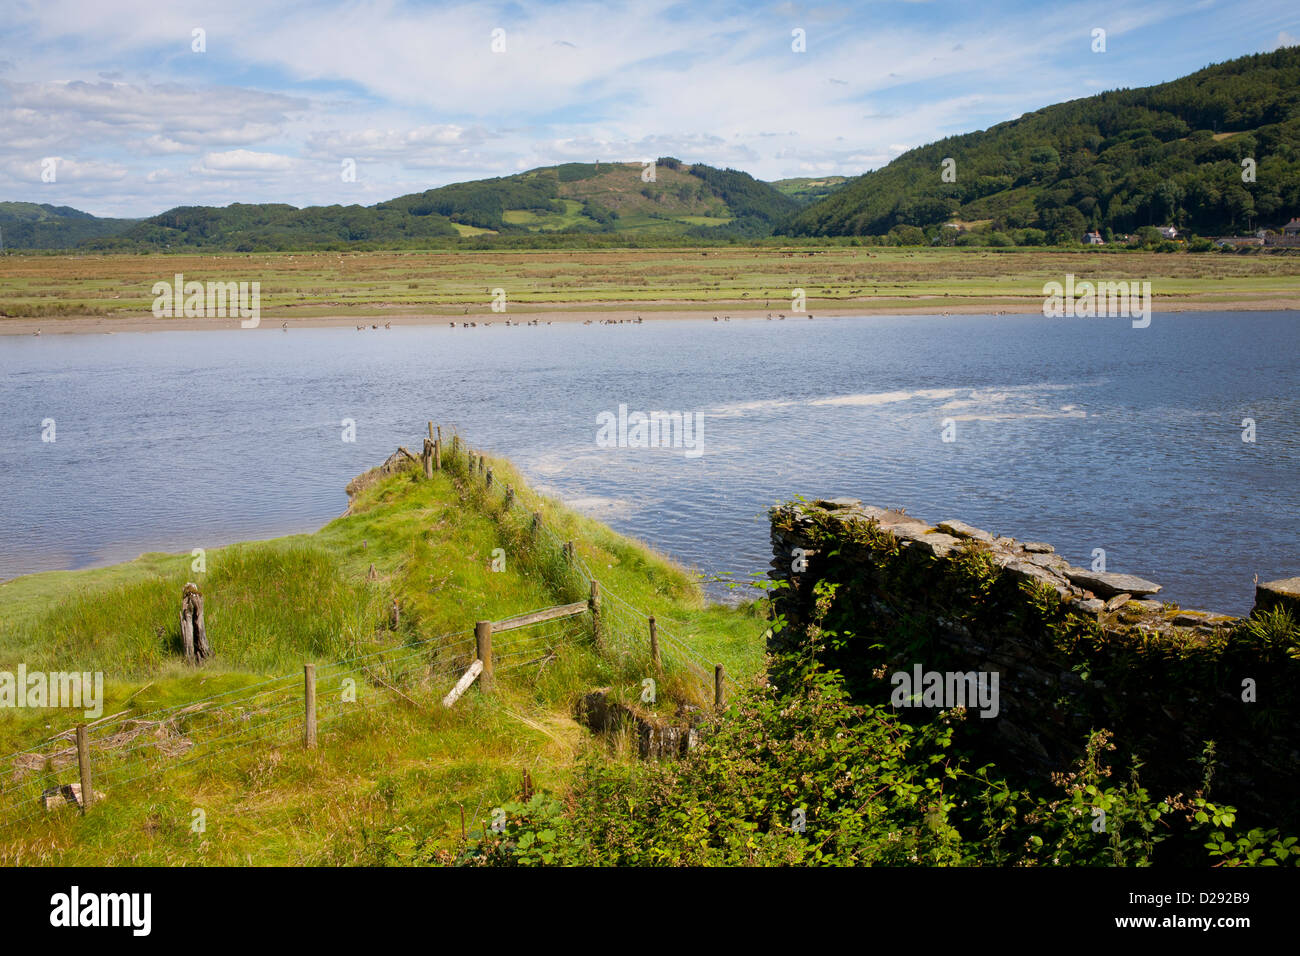 View from a birdwatching hide across the river Dyfi. RSPB Ynys Hir reserve. Ceredigion, Wales. Stock Photo